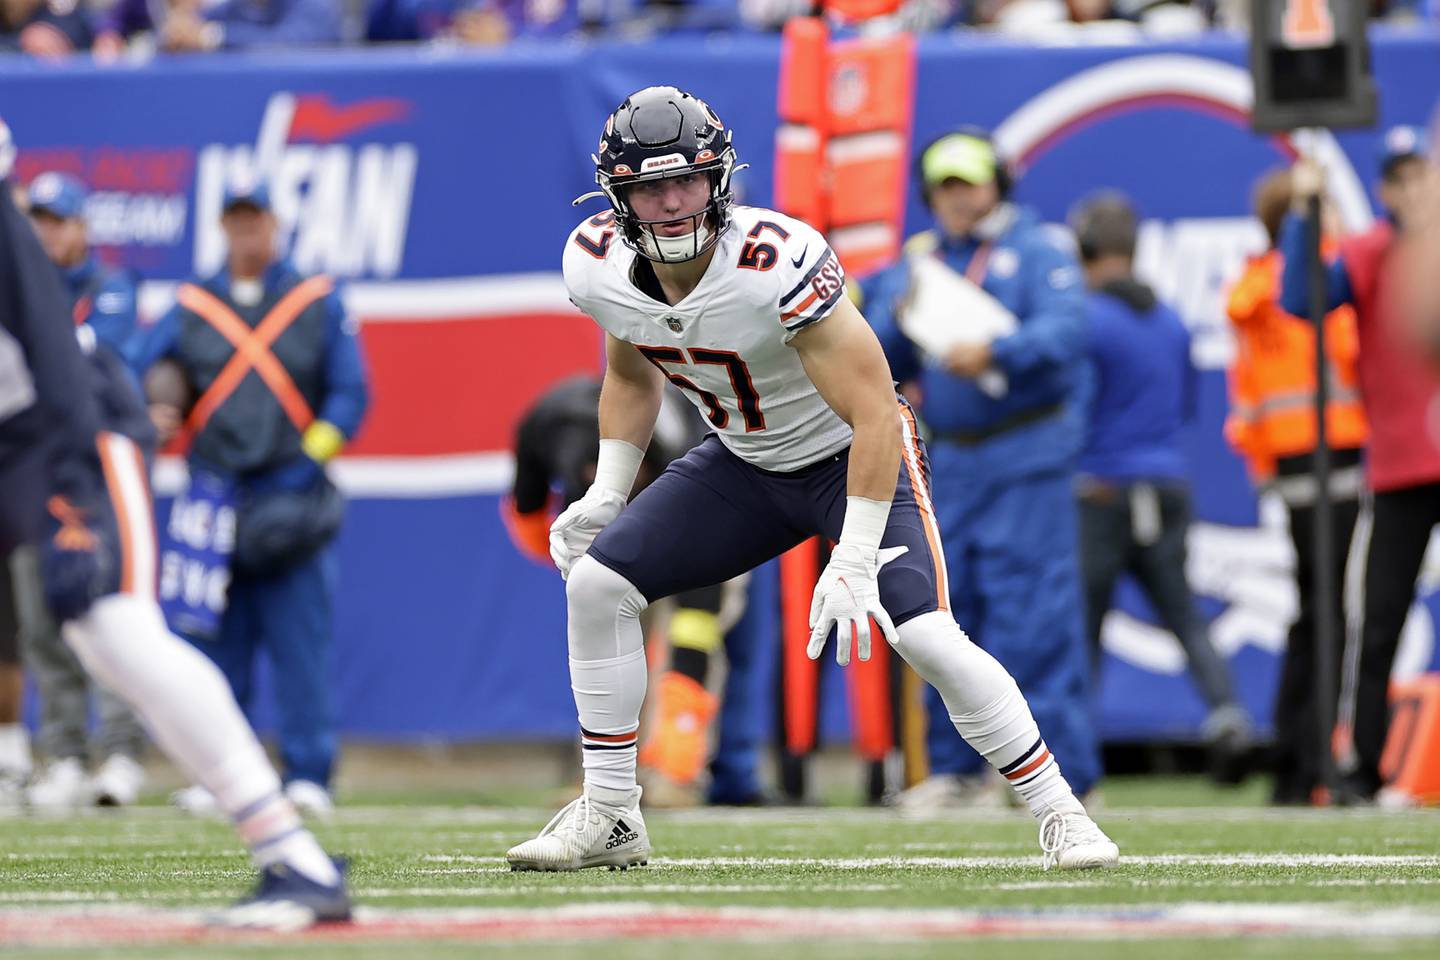 Chicago Bears linebacker Jack Sanborn defends against the New York Giants, Sunday, Oct. 2, 2022, in East Rutherford, N.J.